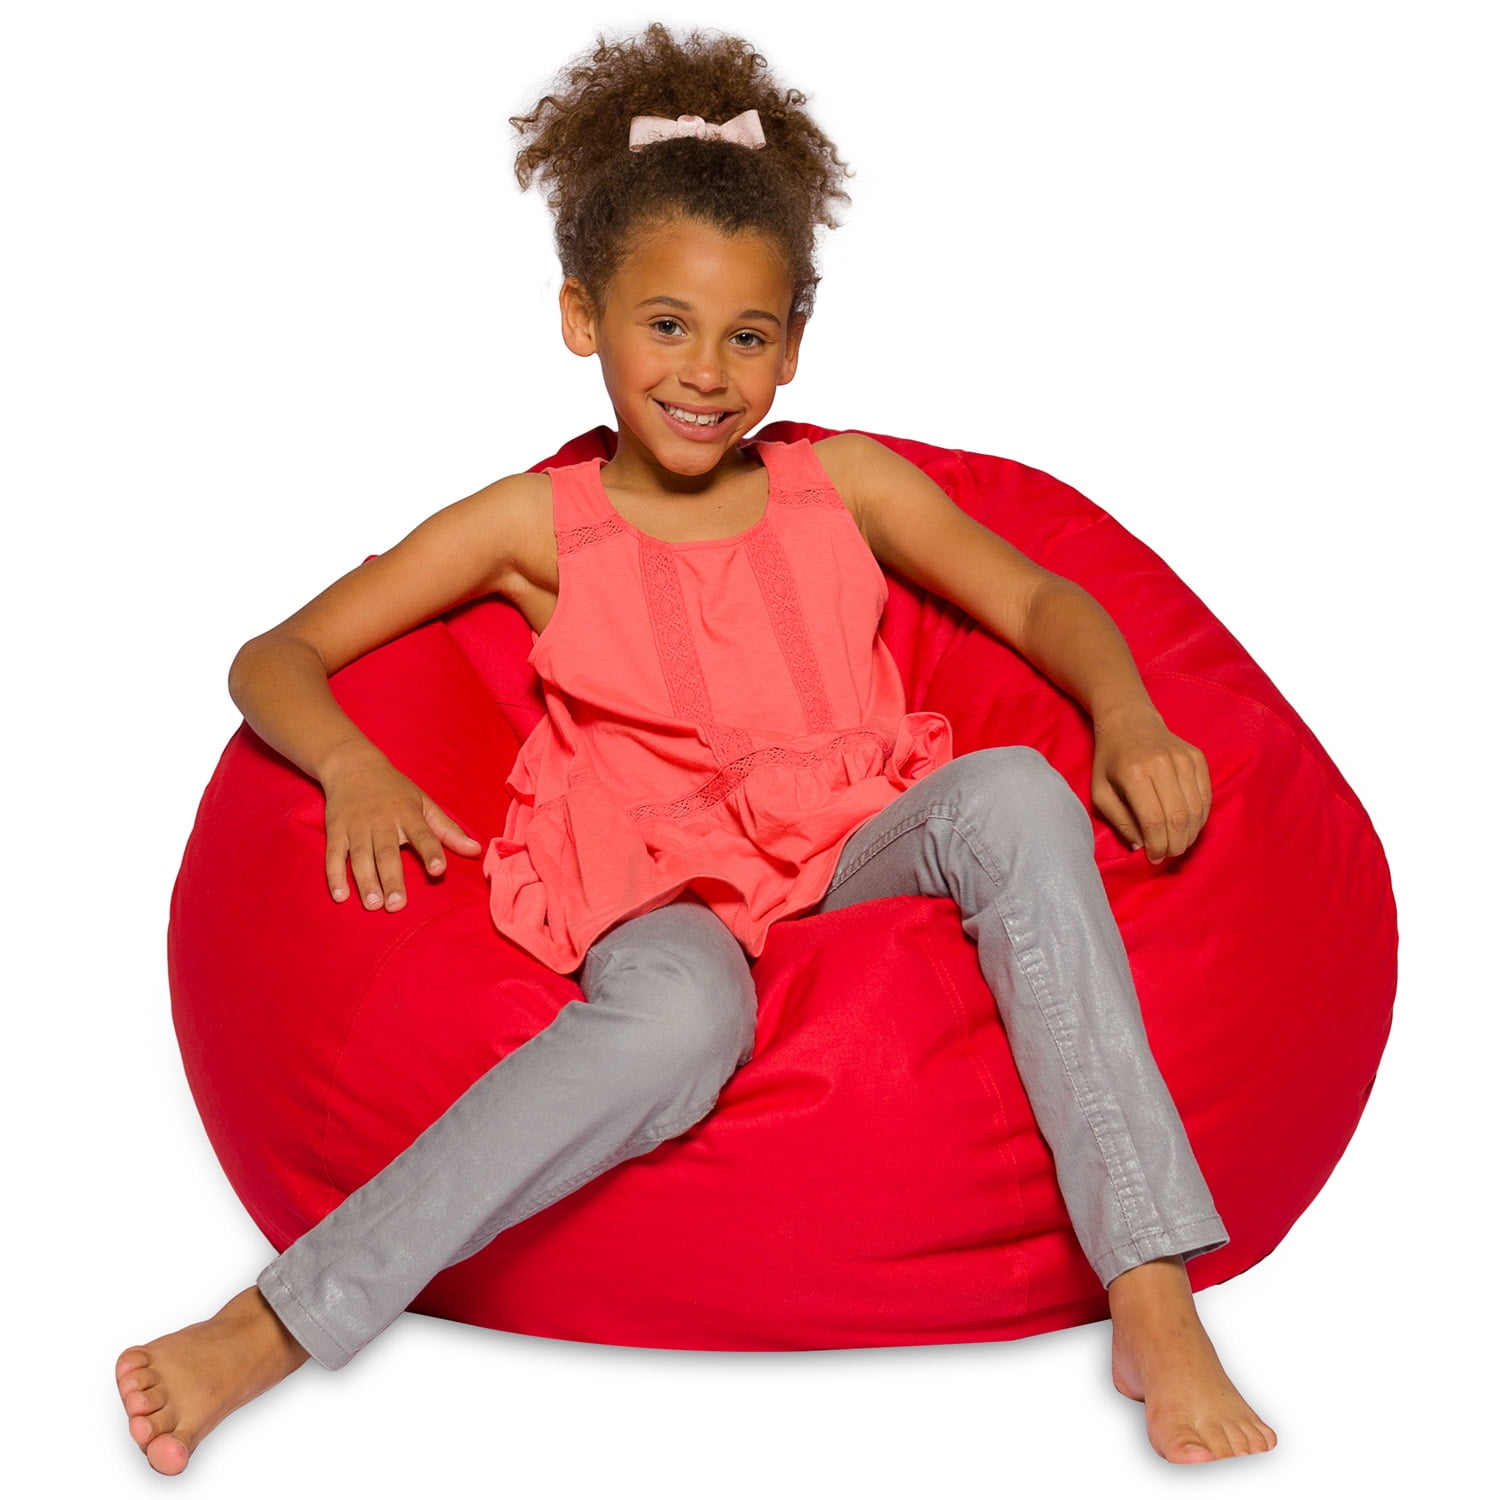 Everything You Need to Know About Bean Bags (And Our Top 5 Choices)